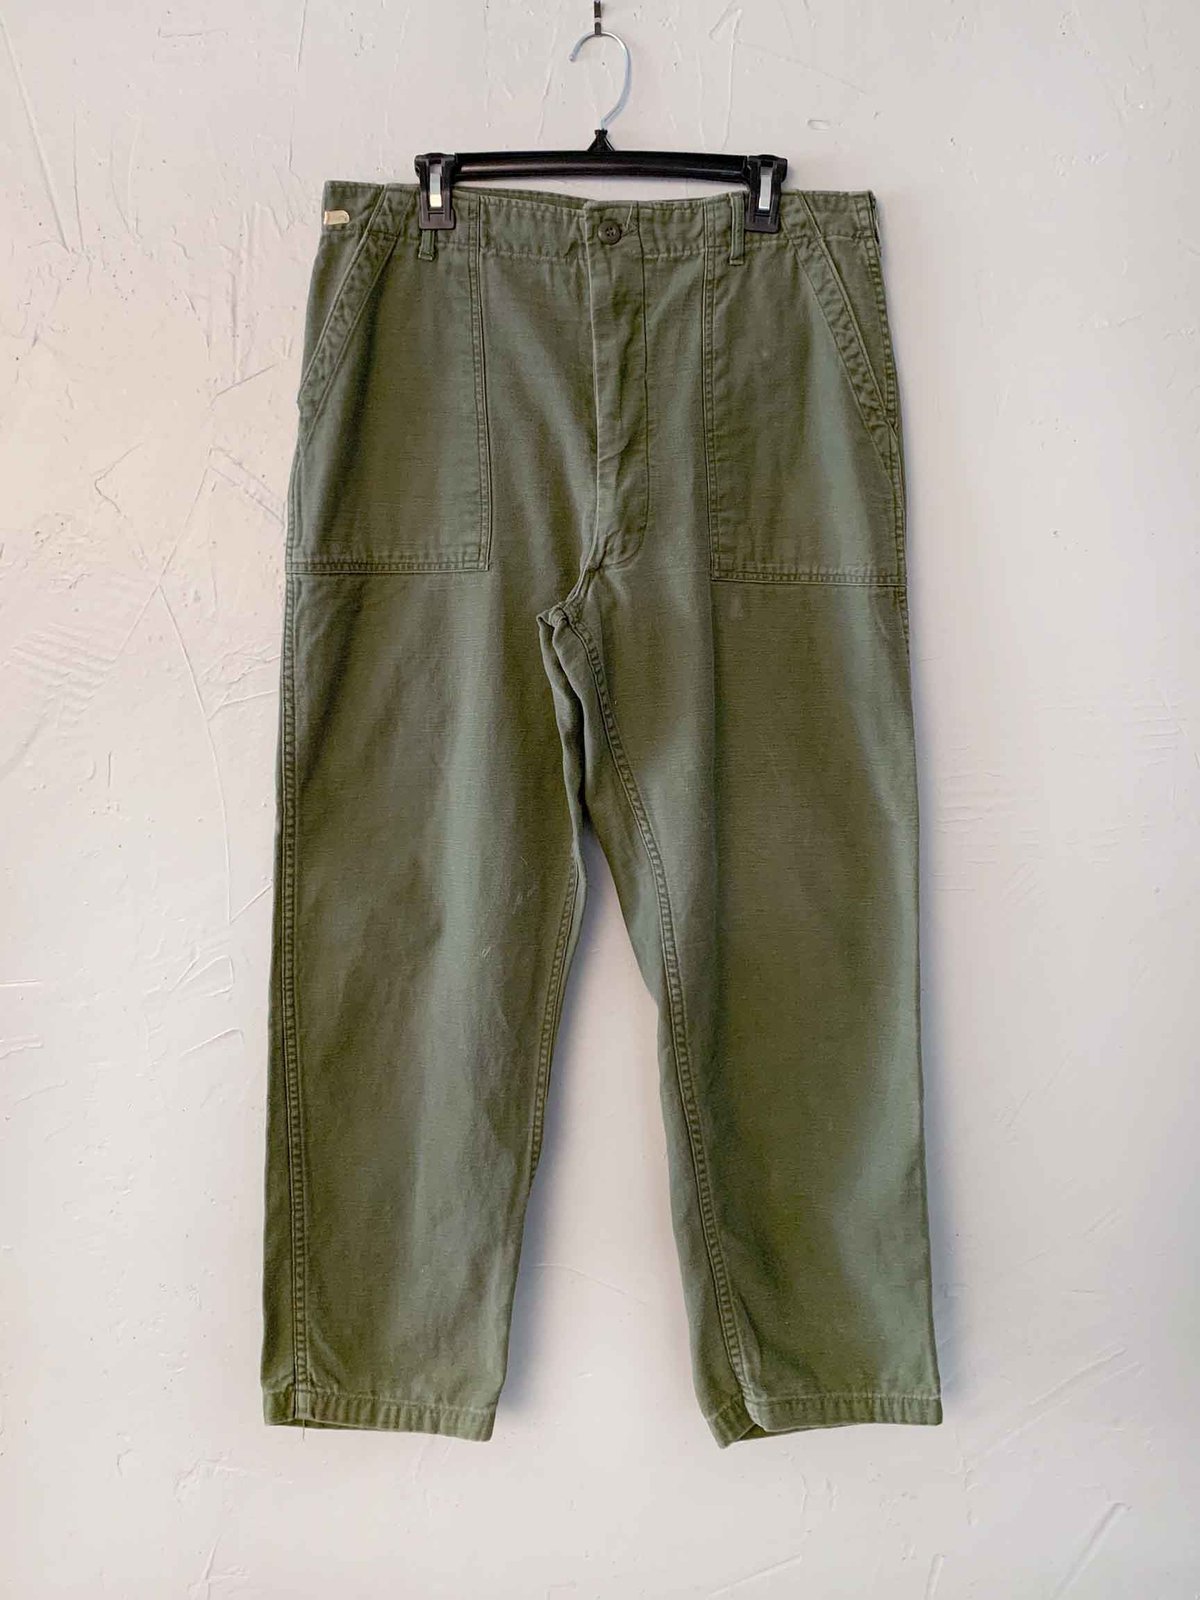 Vintage '70s US Army OG-107 Military Utility Trousers - Made in USA - 38x31  - #2